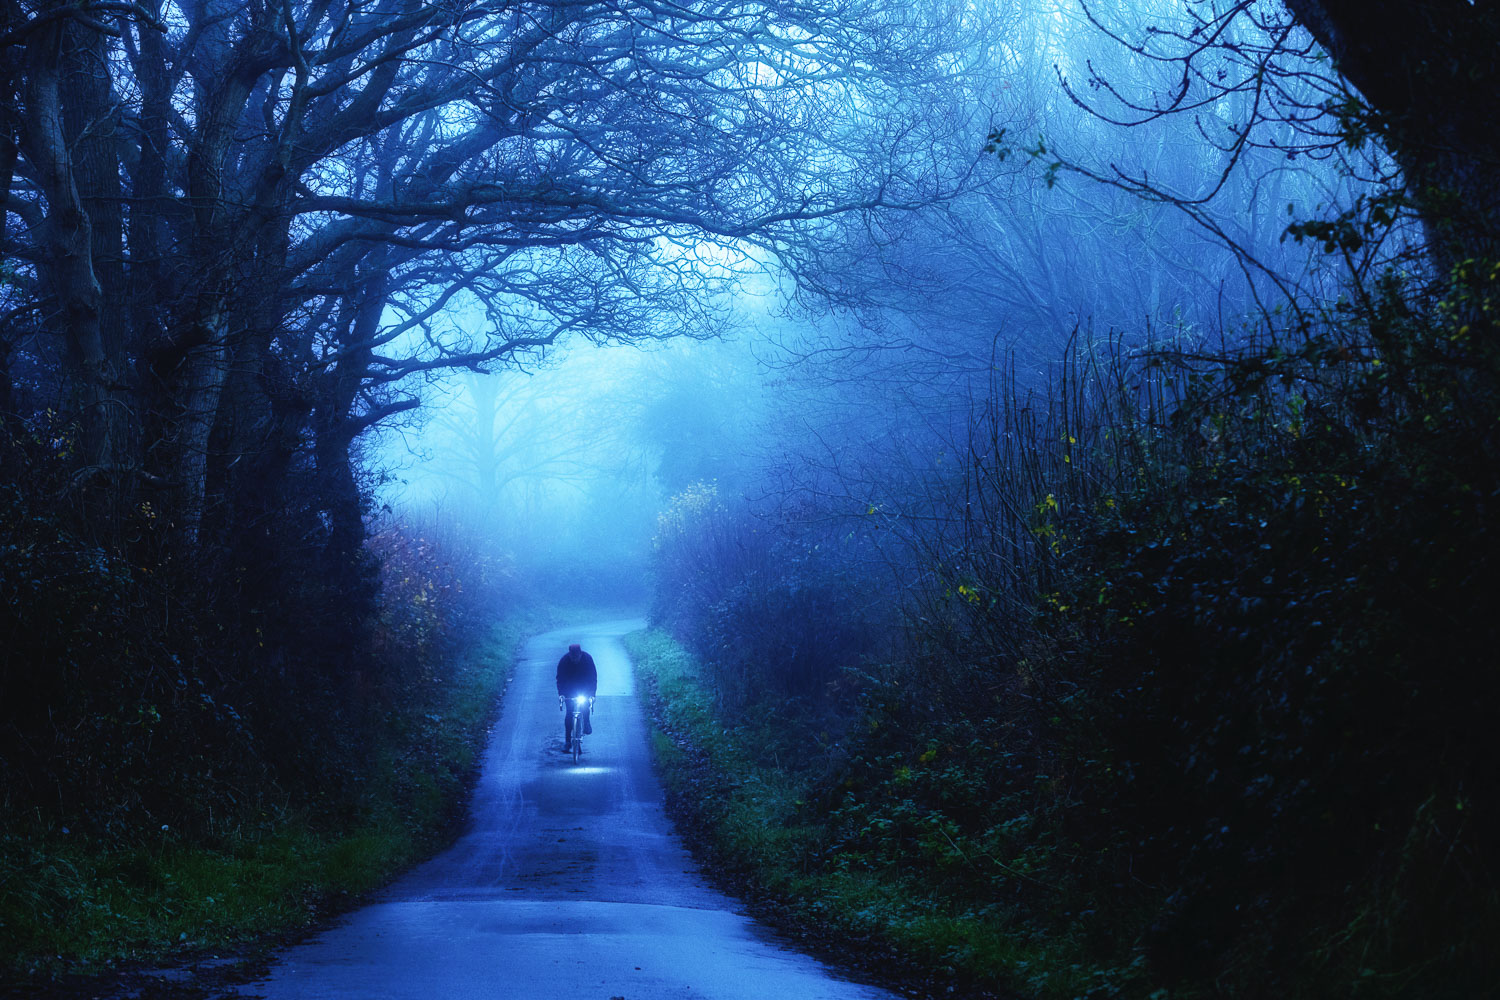 Cyclist with headlamp on a spooky foggy English lane in winter